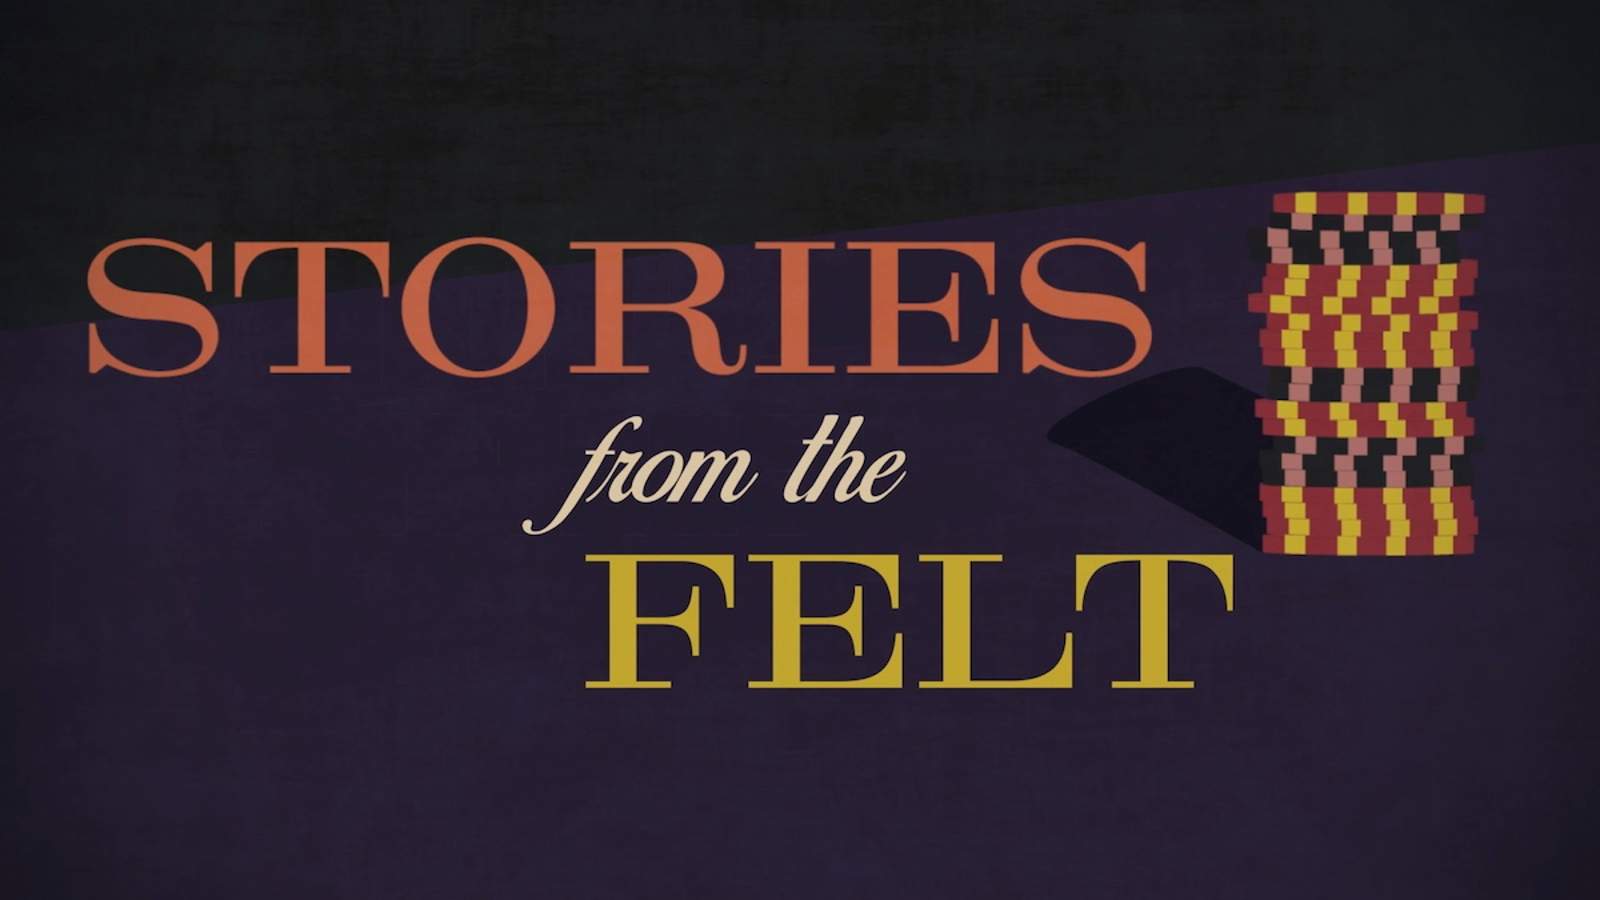 "Stories from the Felt" Closes by Dealing "Wild Cards"